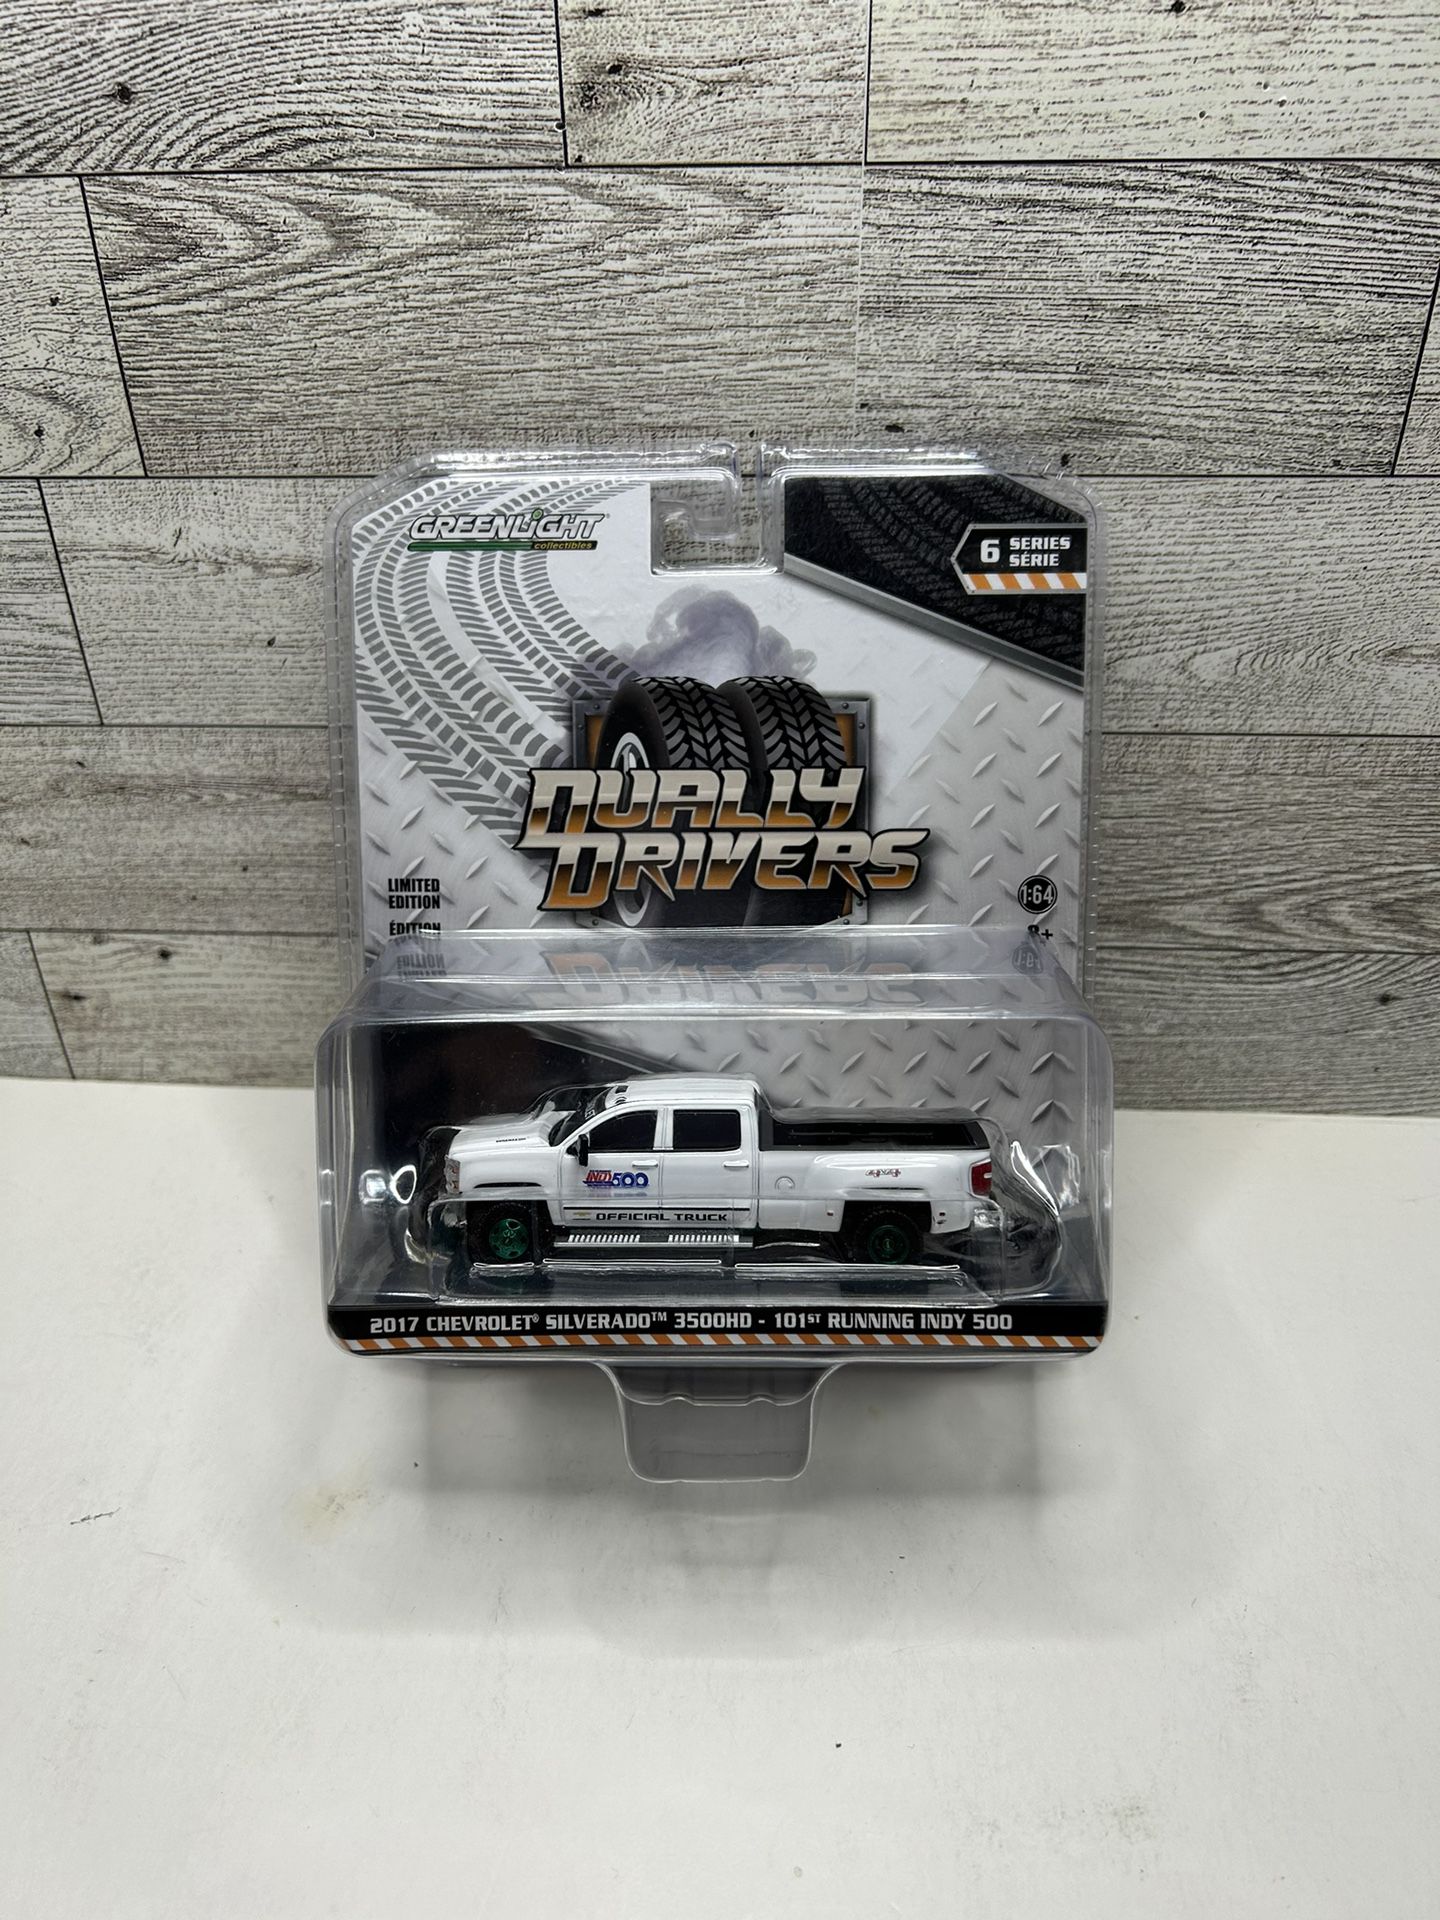 GreenLight Collectibles Dually Drivers  White ‘2017 Chevrolet Silverado 3500HD - 101st Running Indy 500 / Limited Edition Chase • Die Cast Metal • Mad